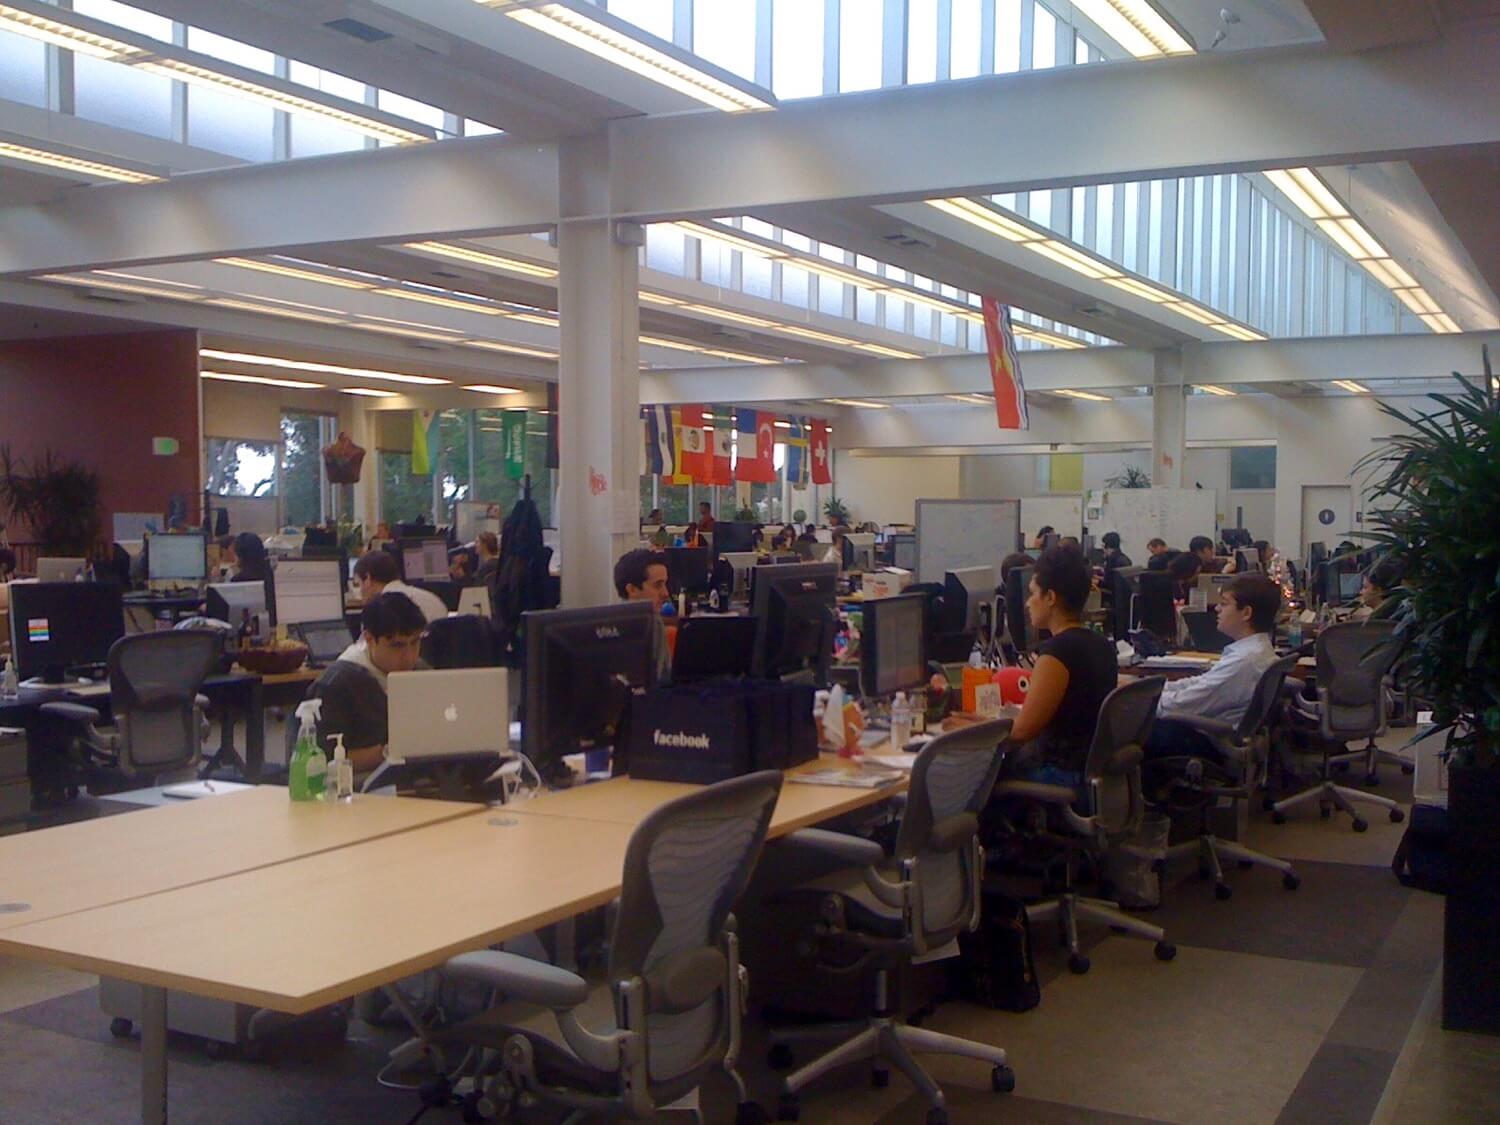 3 productivity tips and tricks for open space workers in California’s Silicon Valley offices